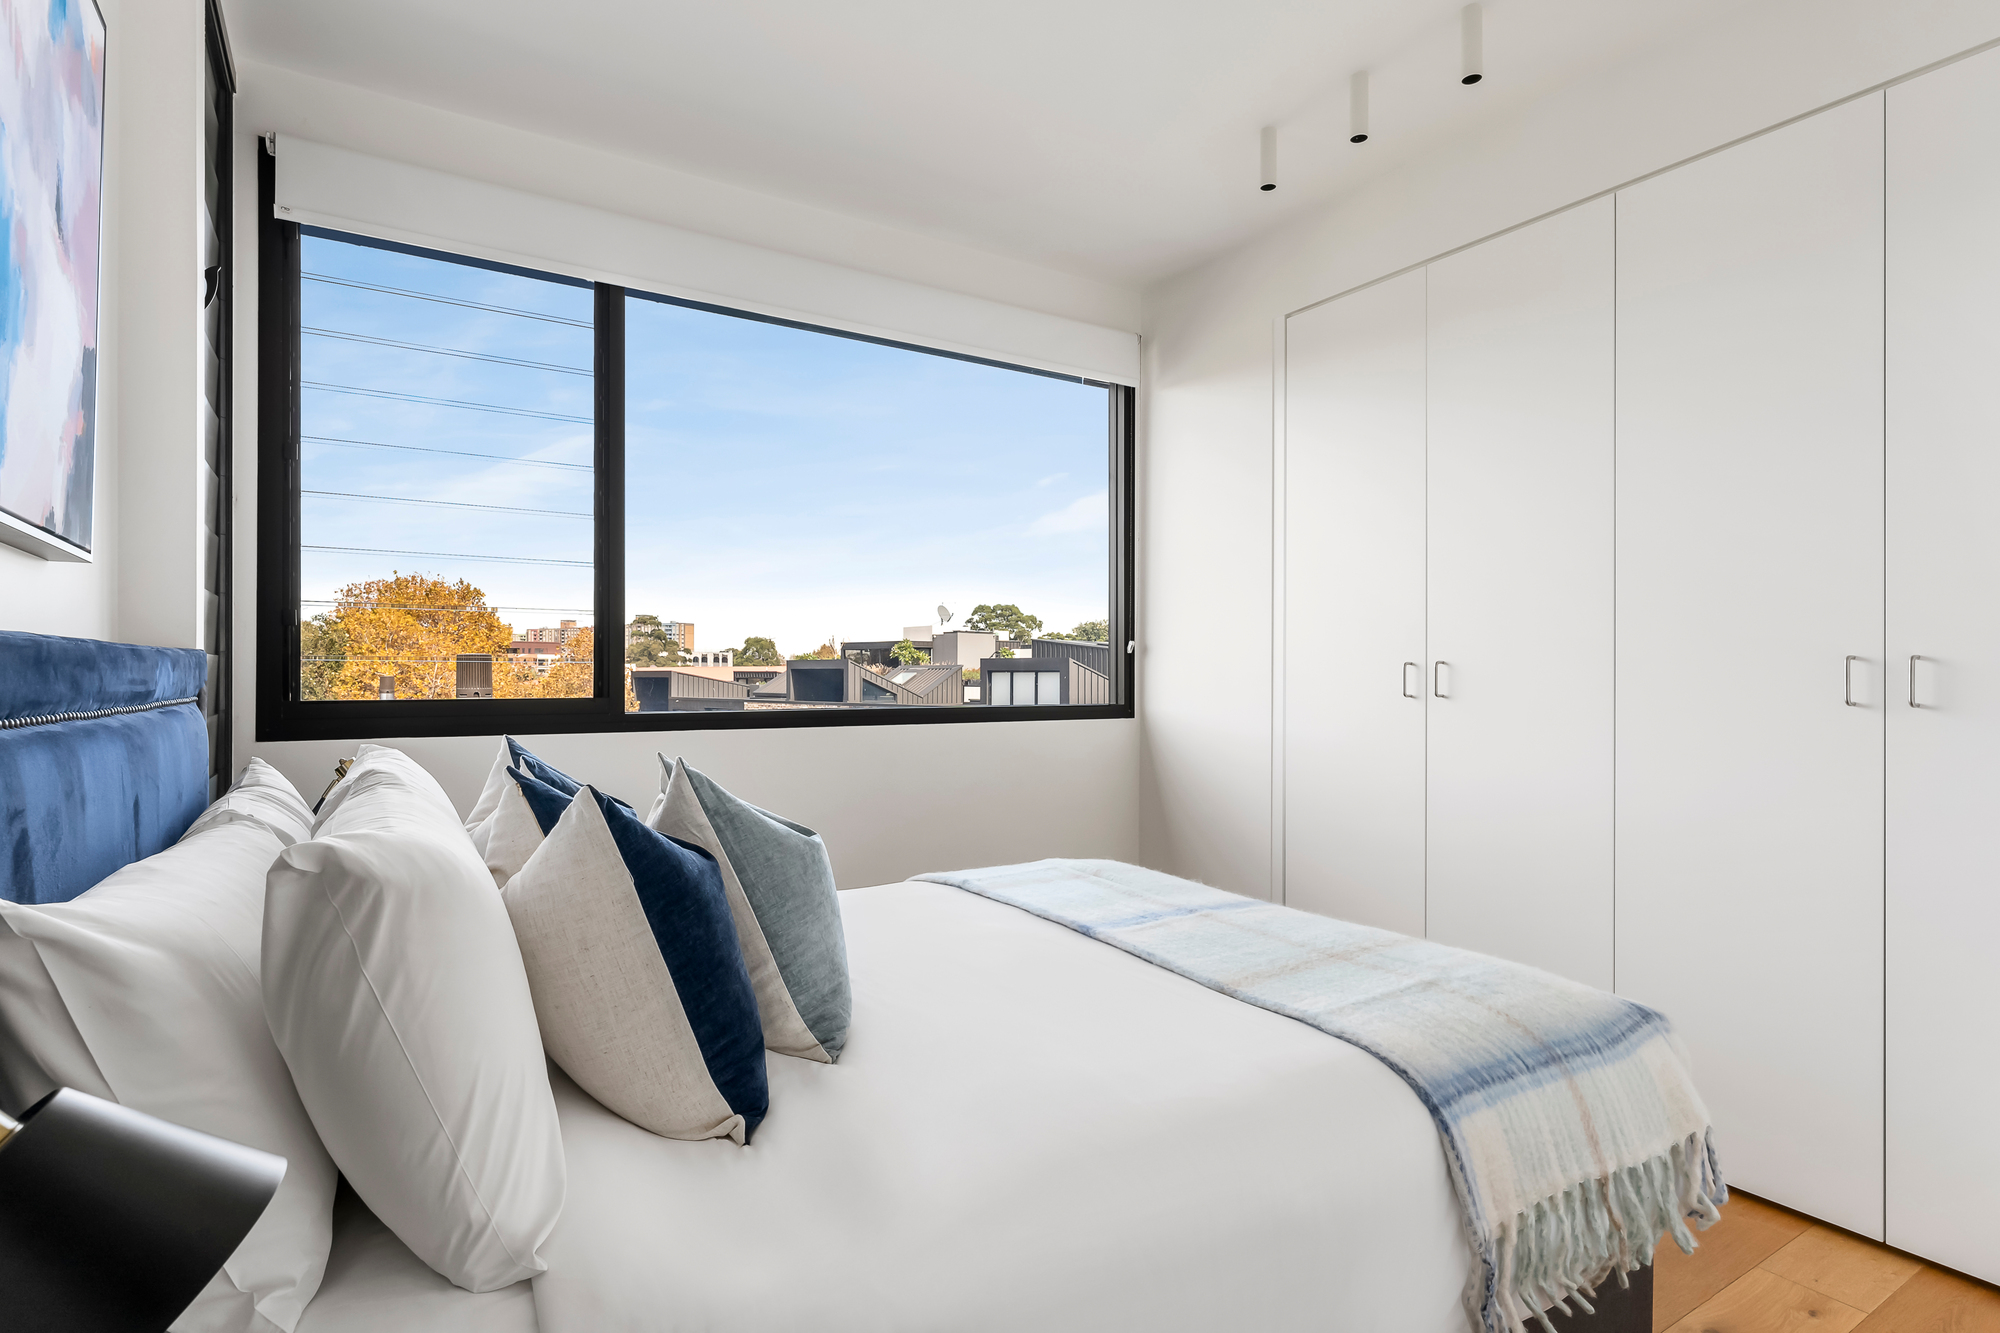 Bedroom - Two Bedroom Apartment - Urban Rest - The Tramway Apartments - Sydney